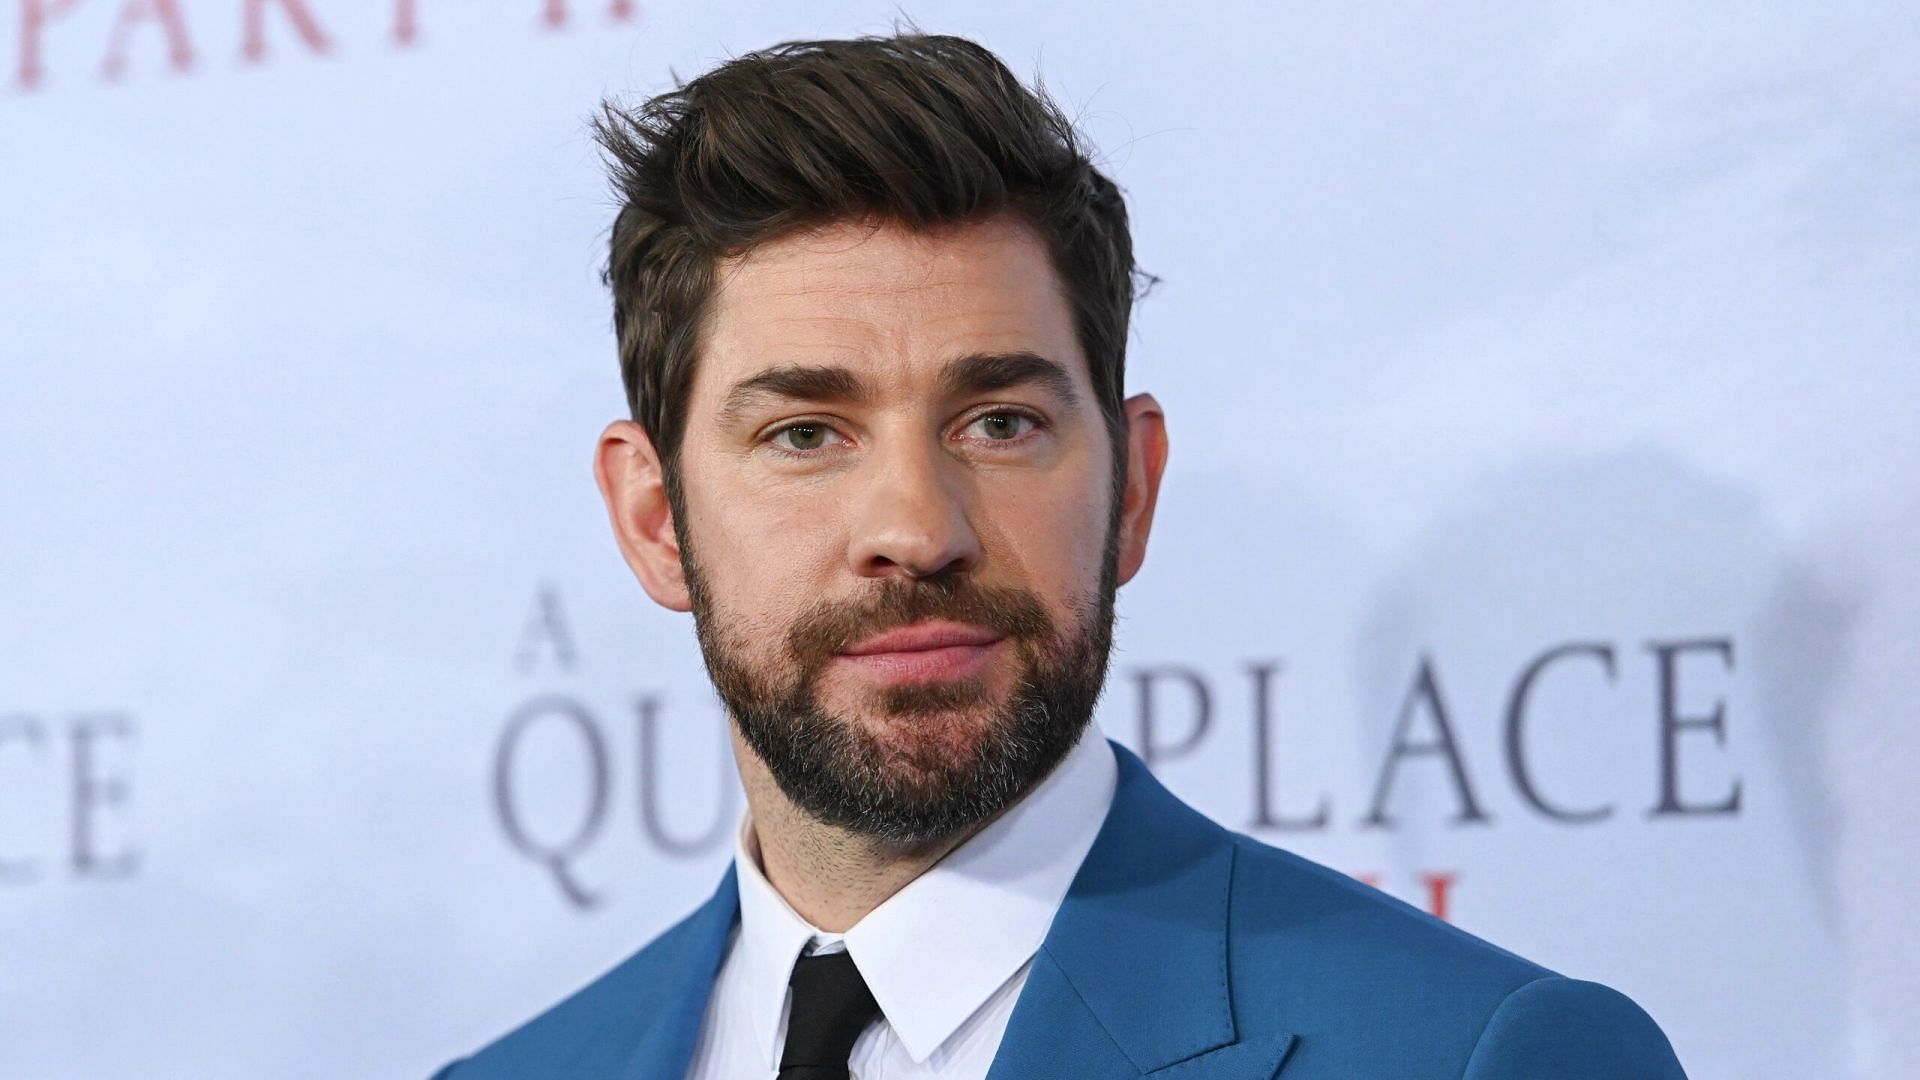 John Krasinski at the premiere for A Quiet Place Part II (image via Mike Coppola/Getty Images)